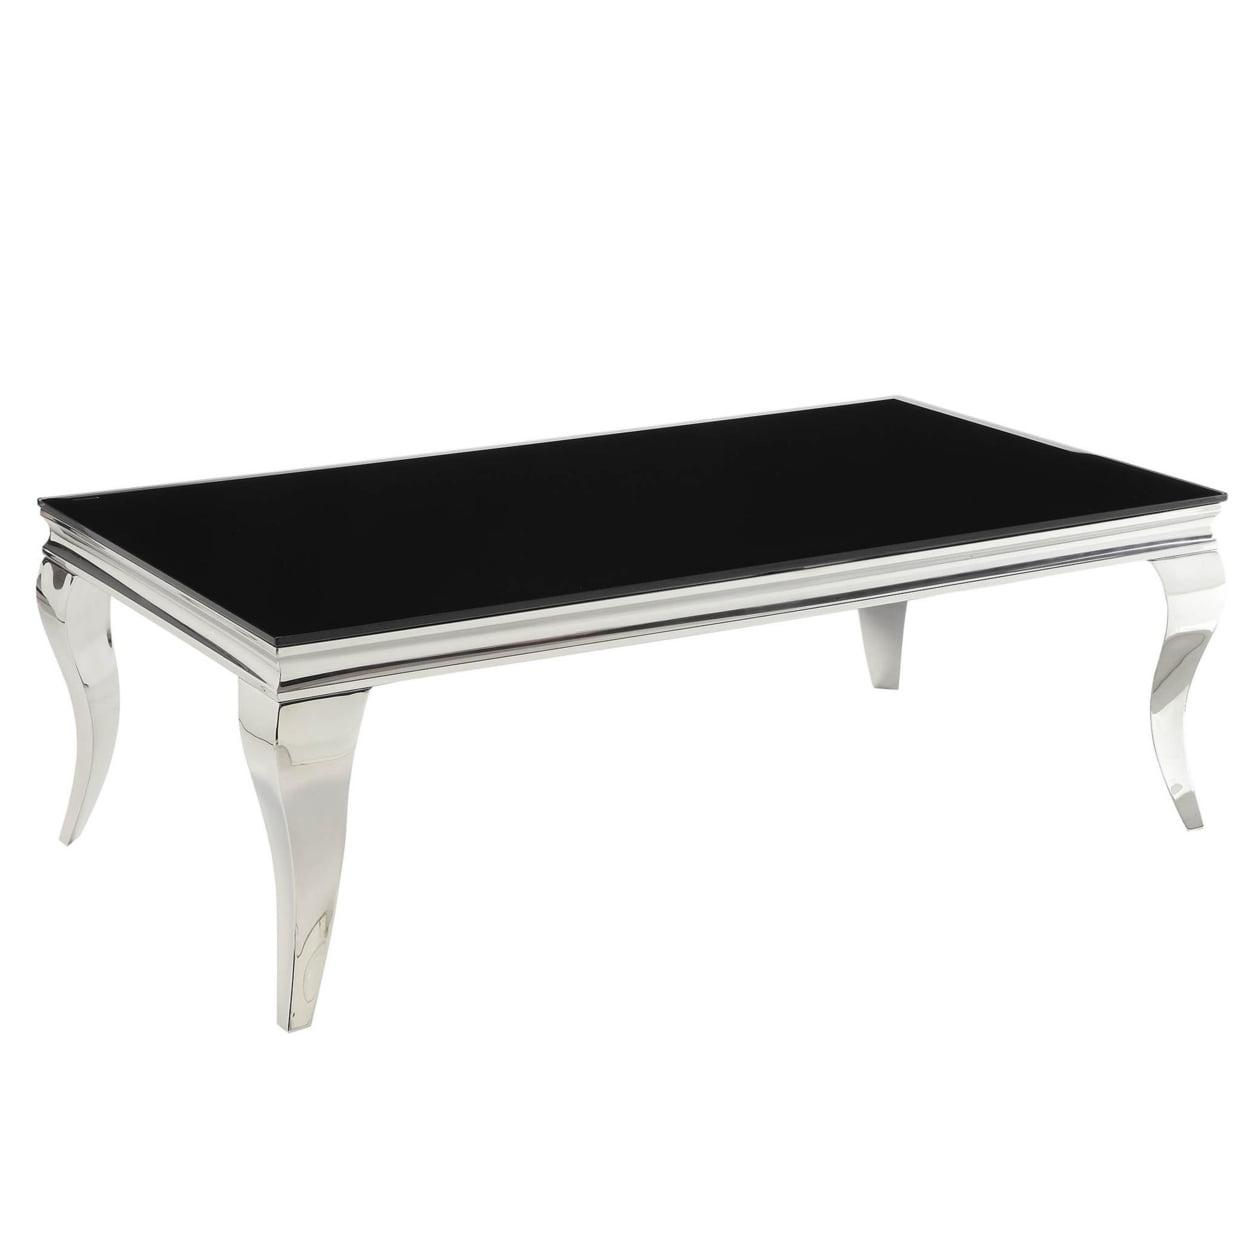 28'' Rectangular Lift-Top Coffee Table with Beveled Black Glass and Silver Metal Frame